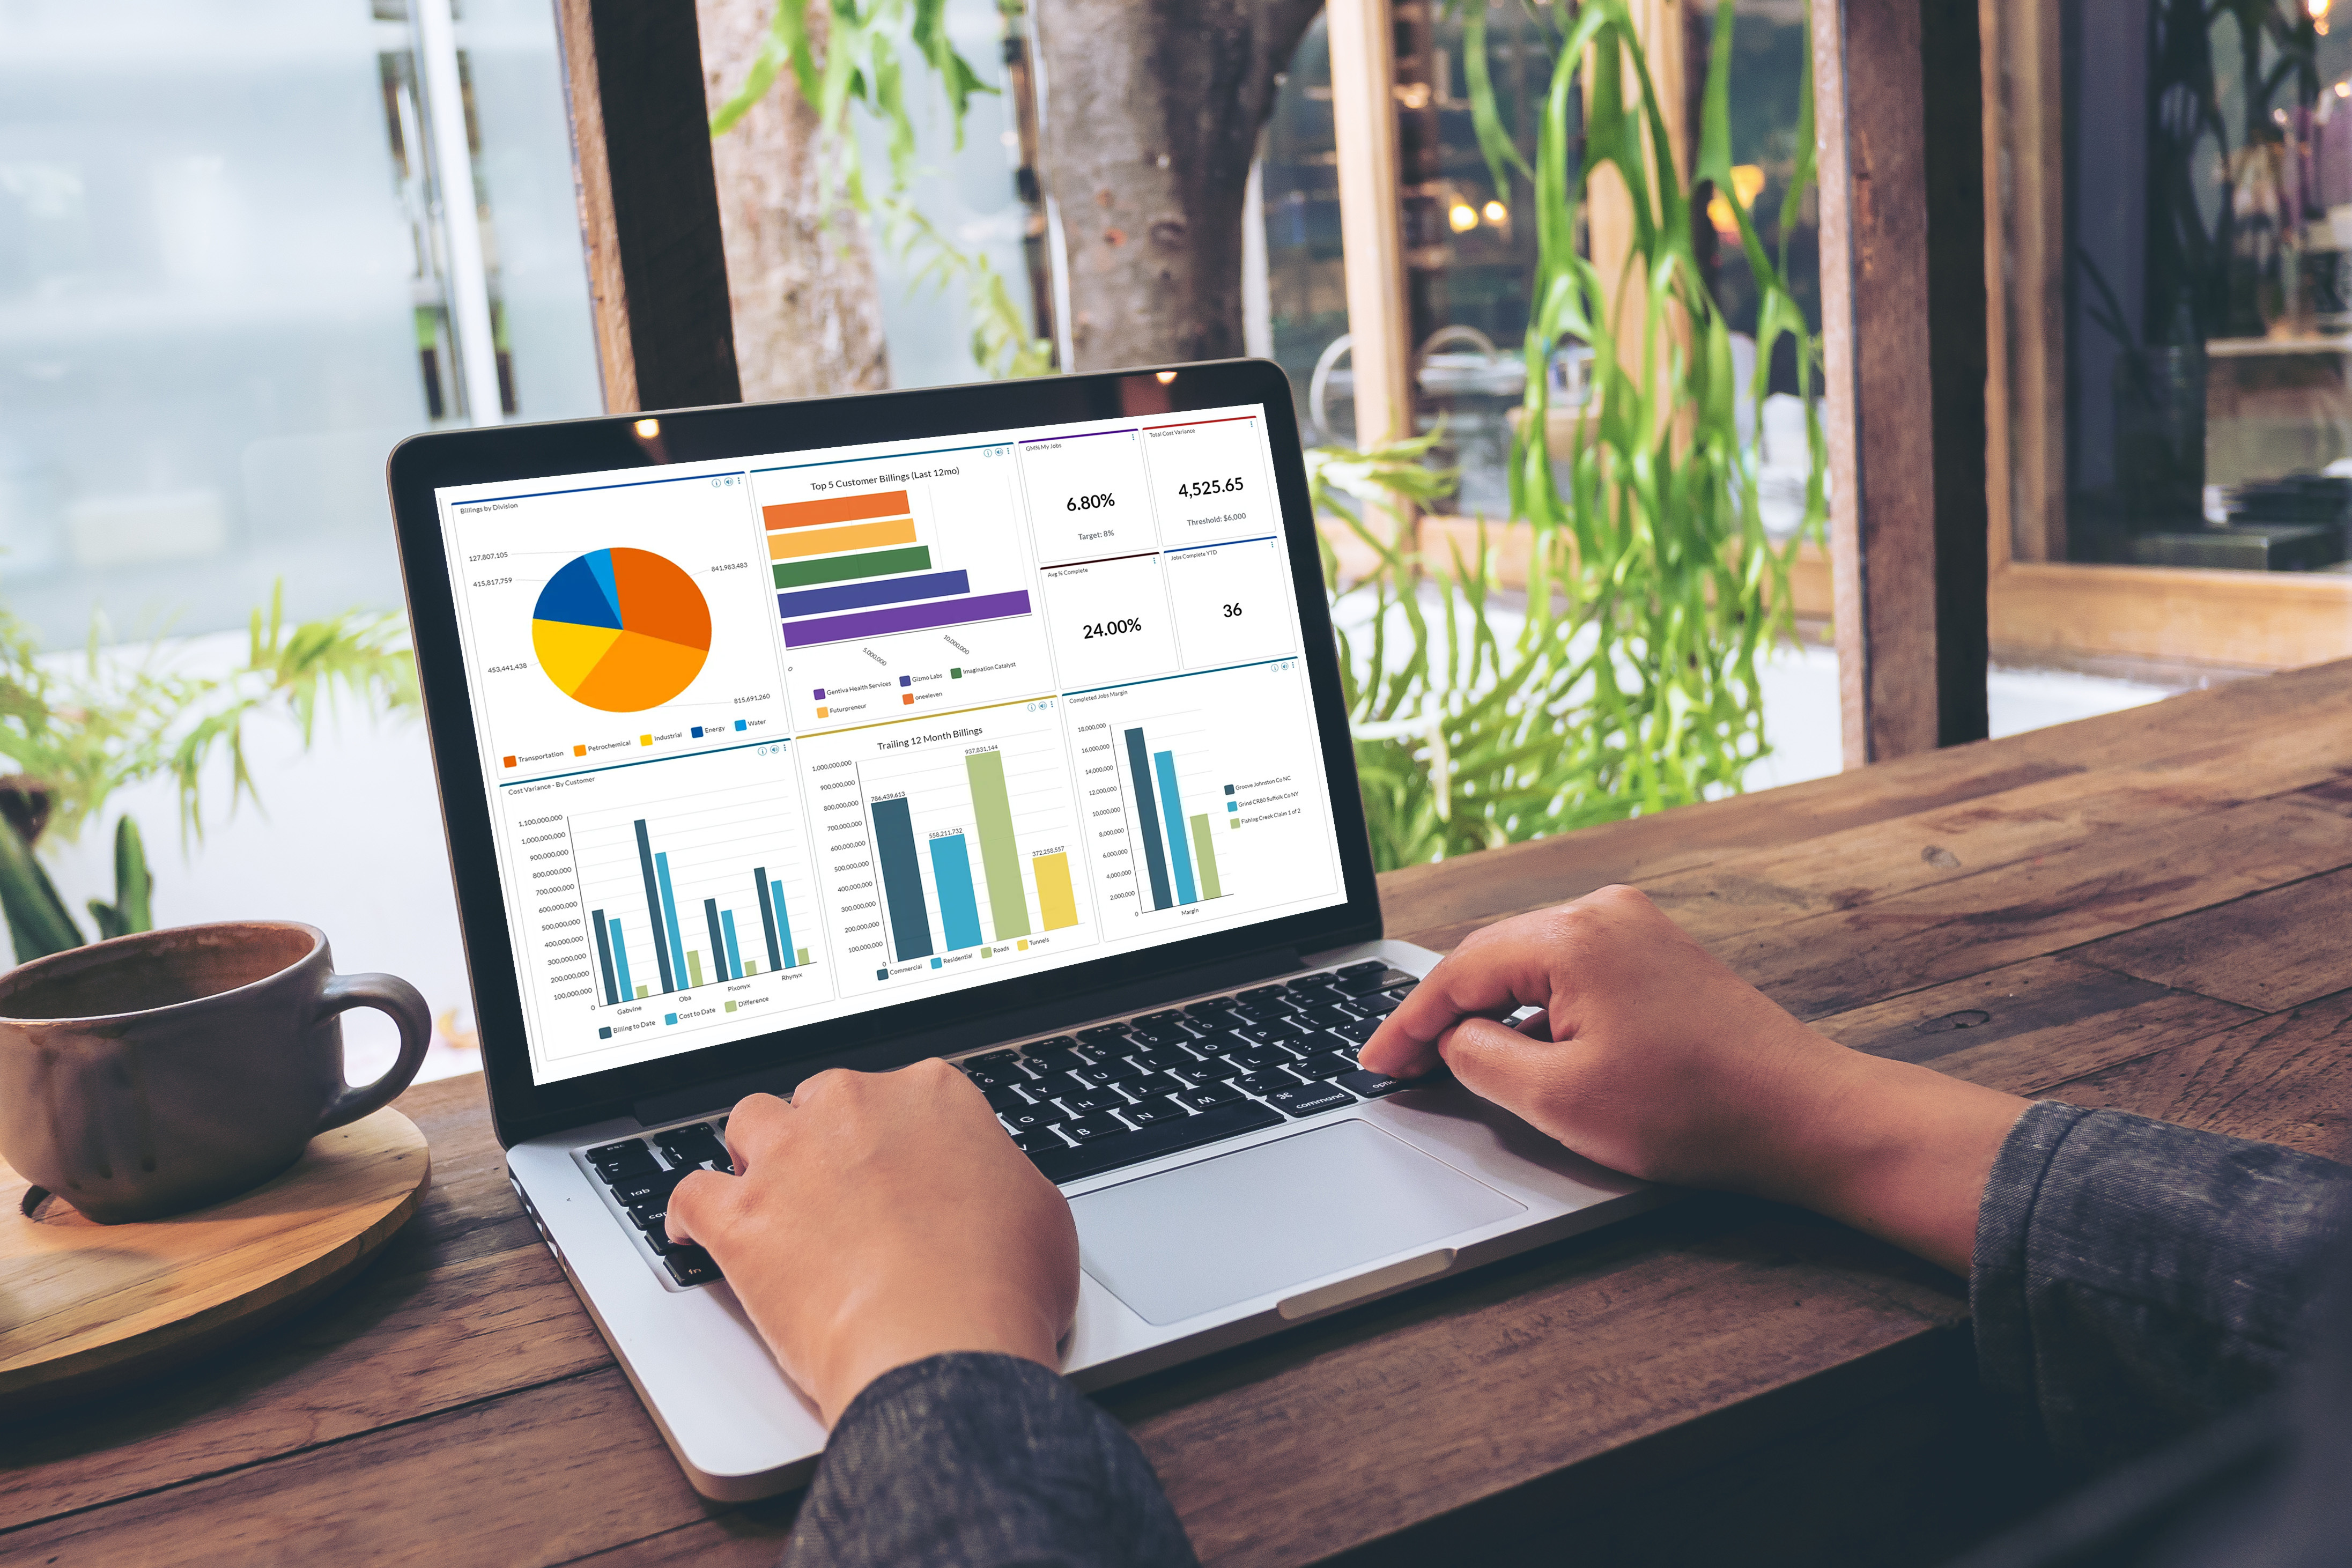 A step-by-step guide on utilizing a business analytics tool effectively. Gain insights and make informed decisions.